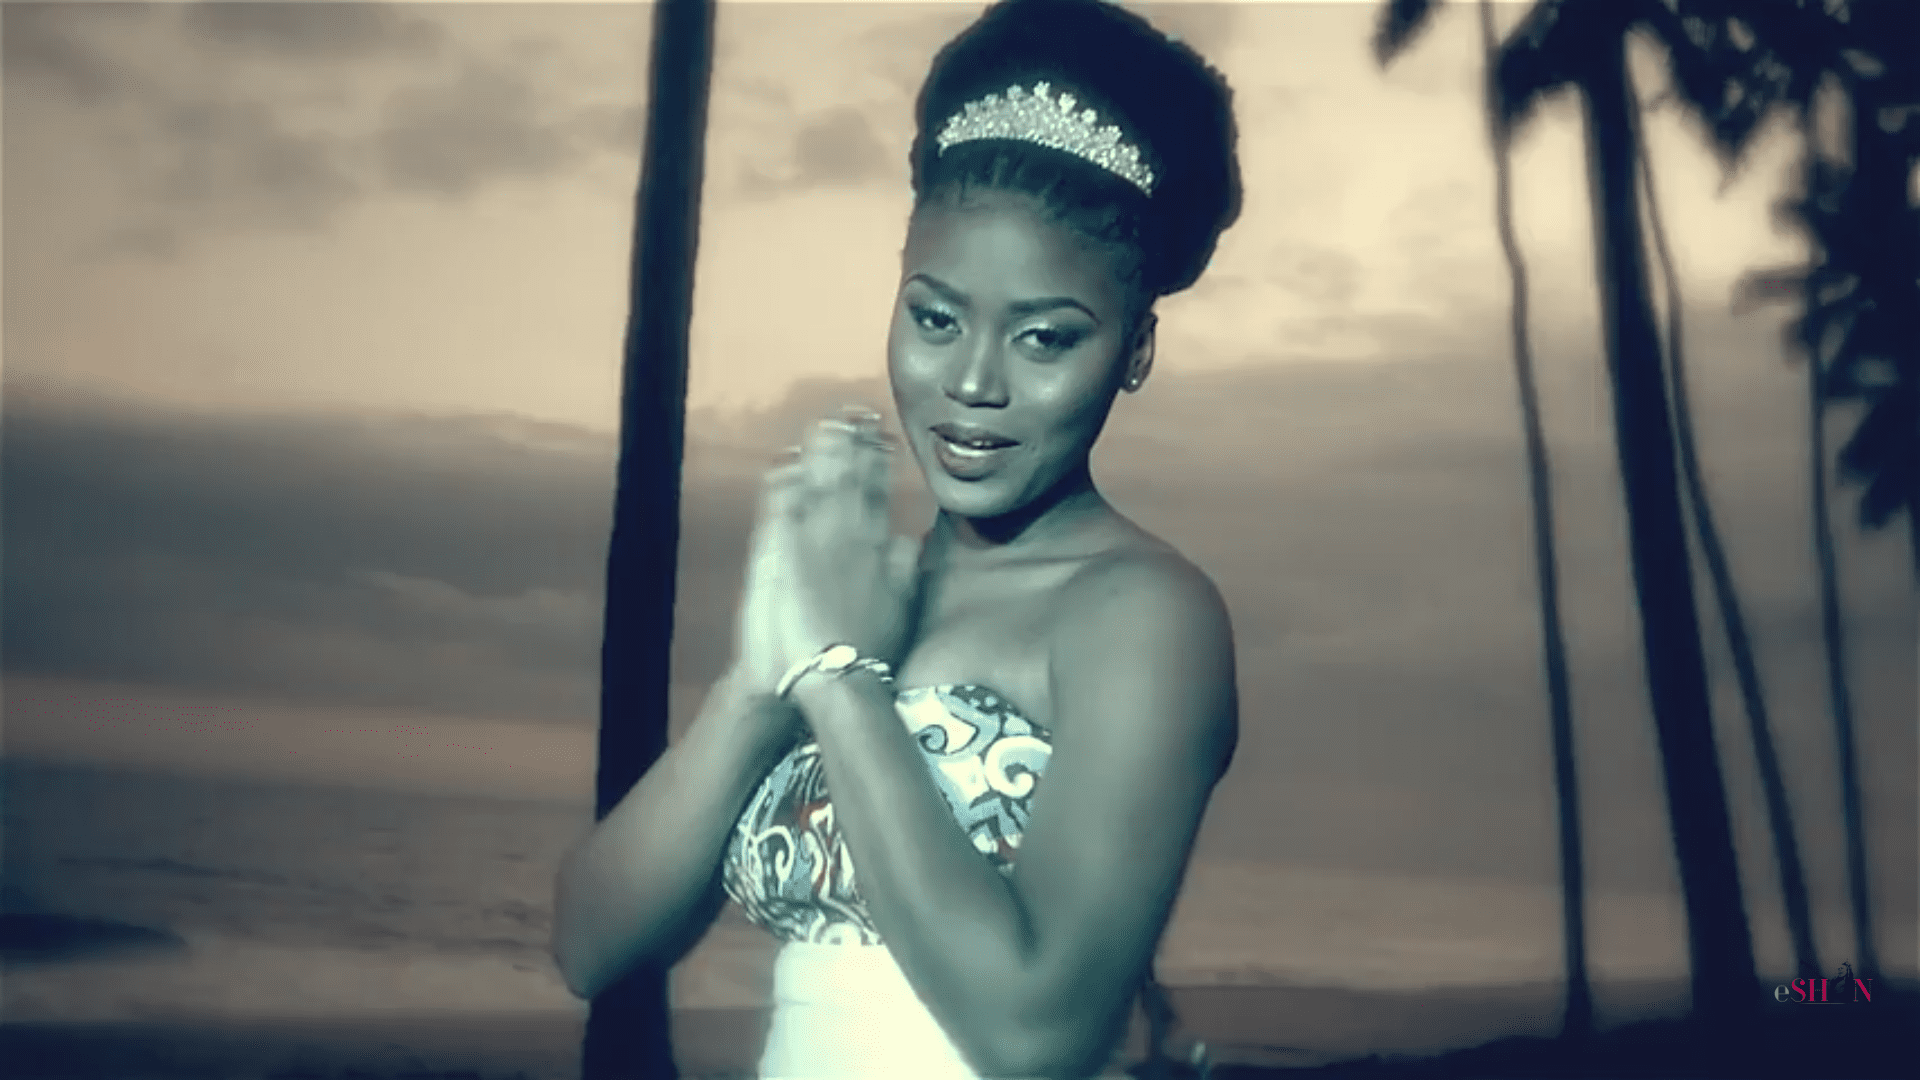 eShun premiers  “Forever” featuring Ayesem.